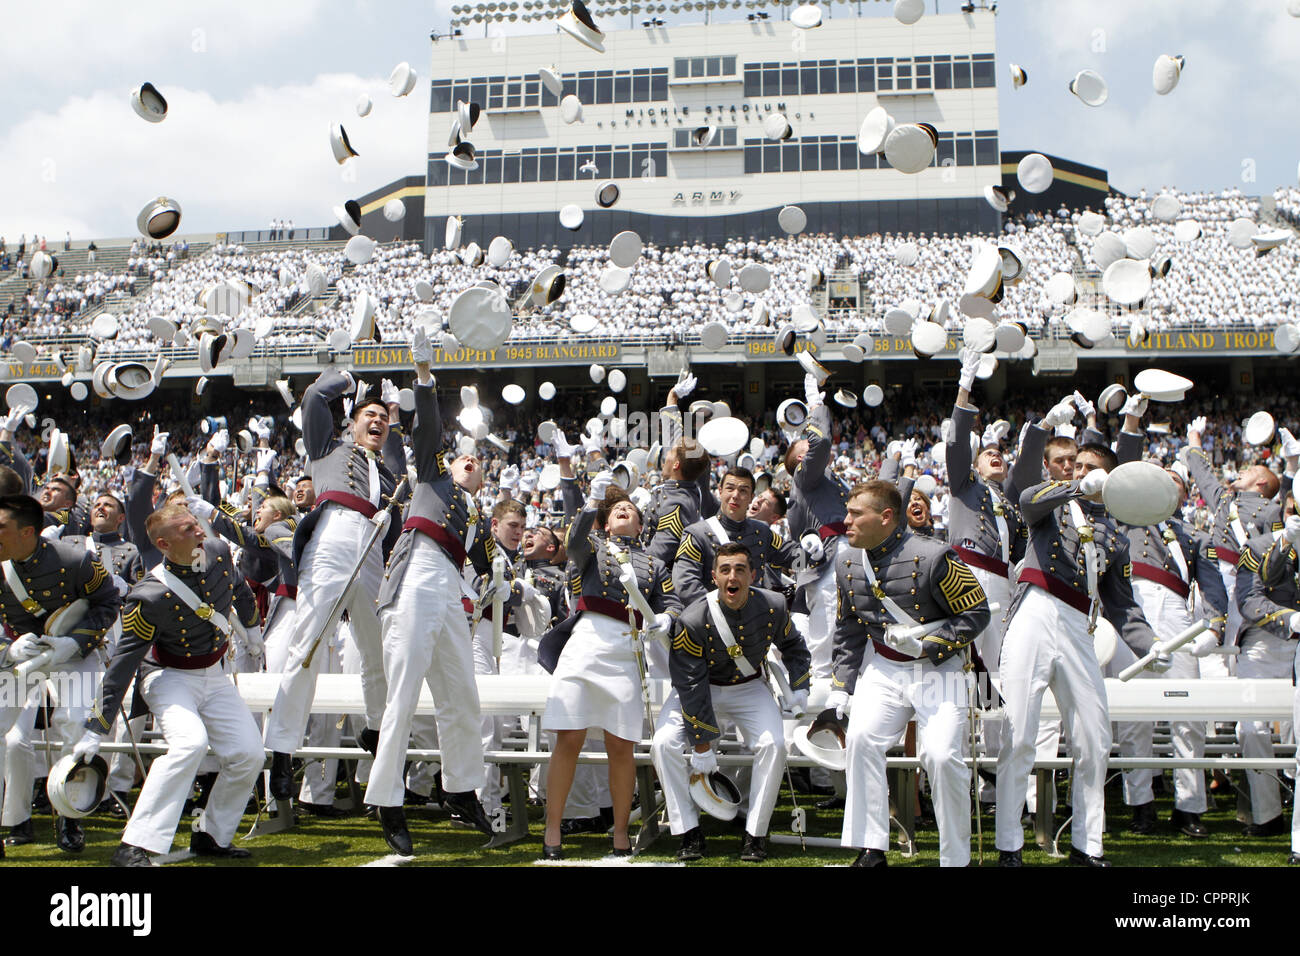 Graduating cadets from the US Military Academy class of 2012 celebrate by throwing their hats into the air during ceremonies May 26, 2012 in West Point, NY. Stock Photo